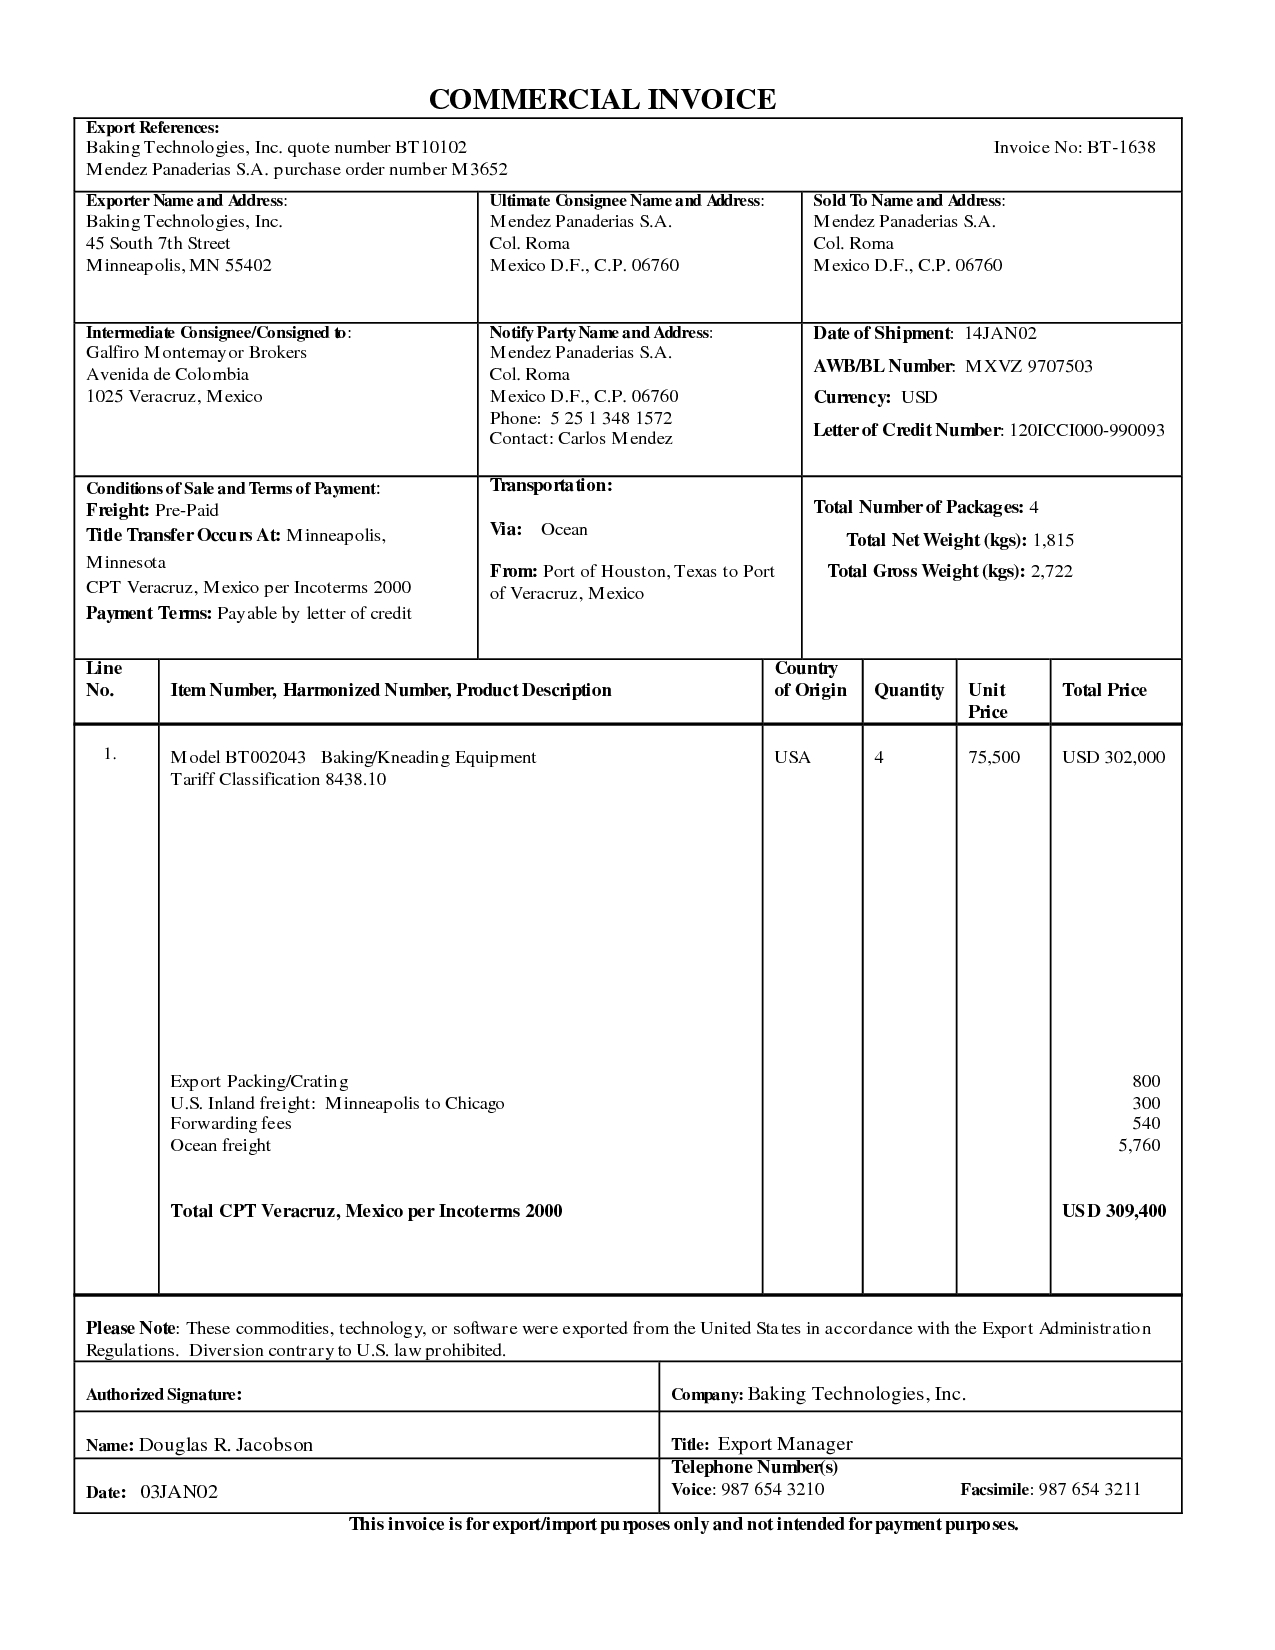 usmca commercial invoice template